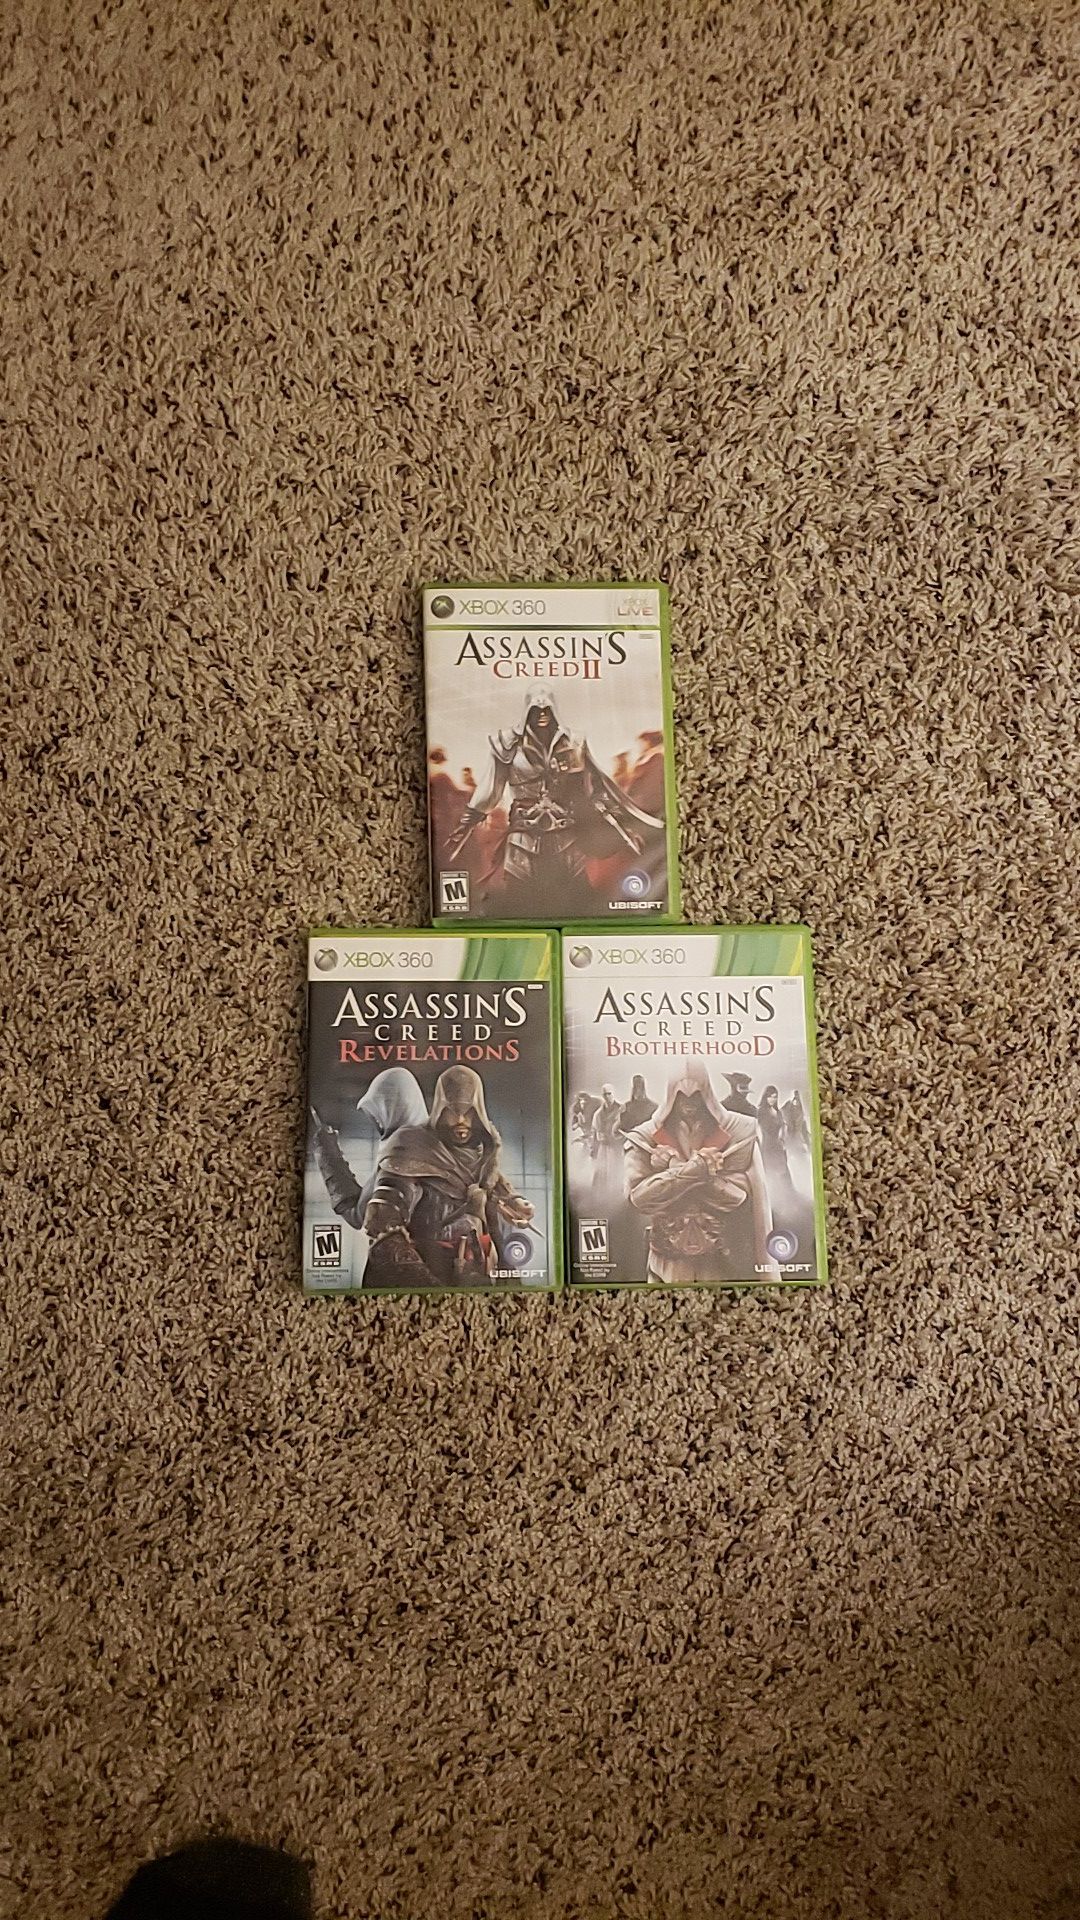 3 Assassins creed games for Xbox 360